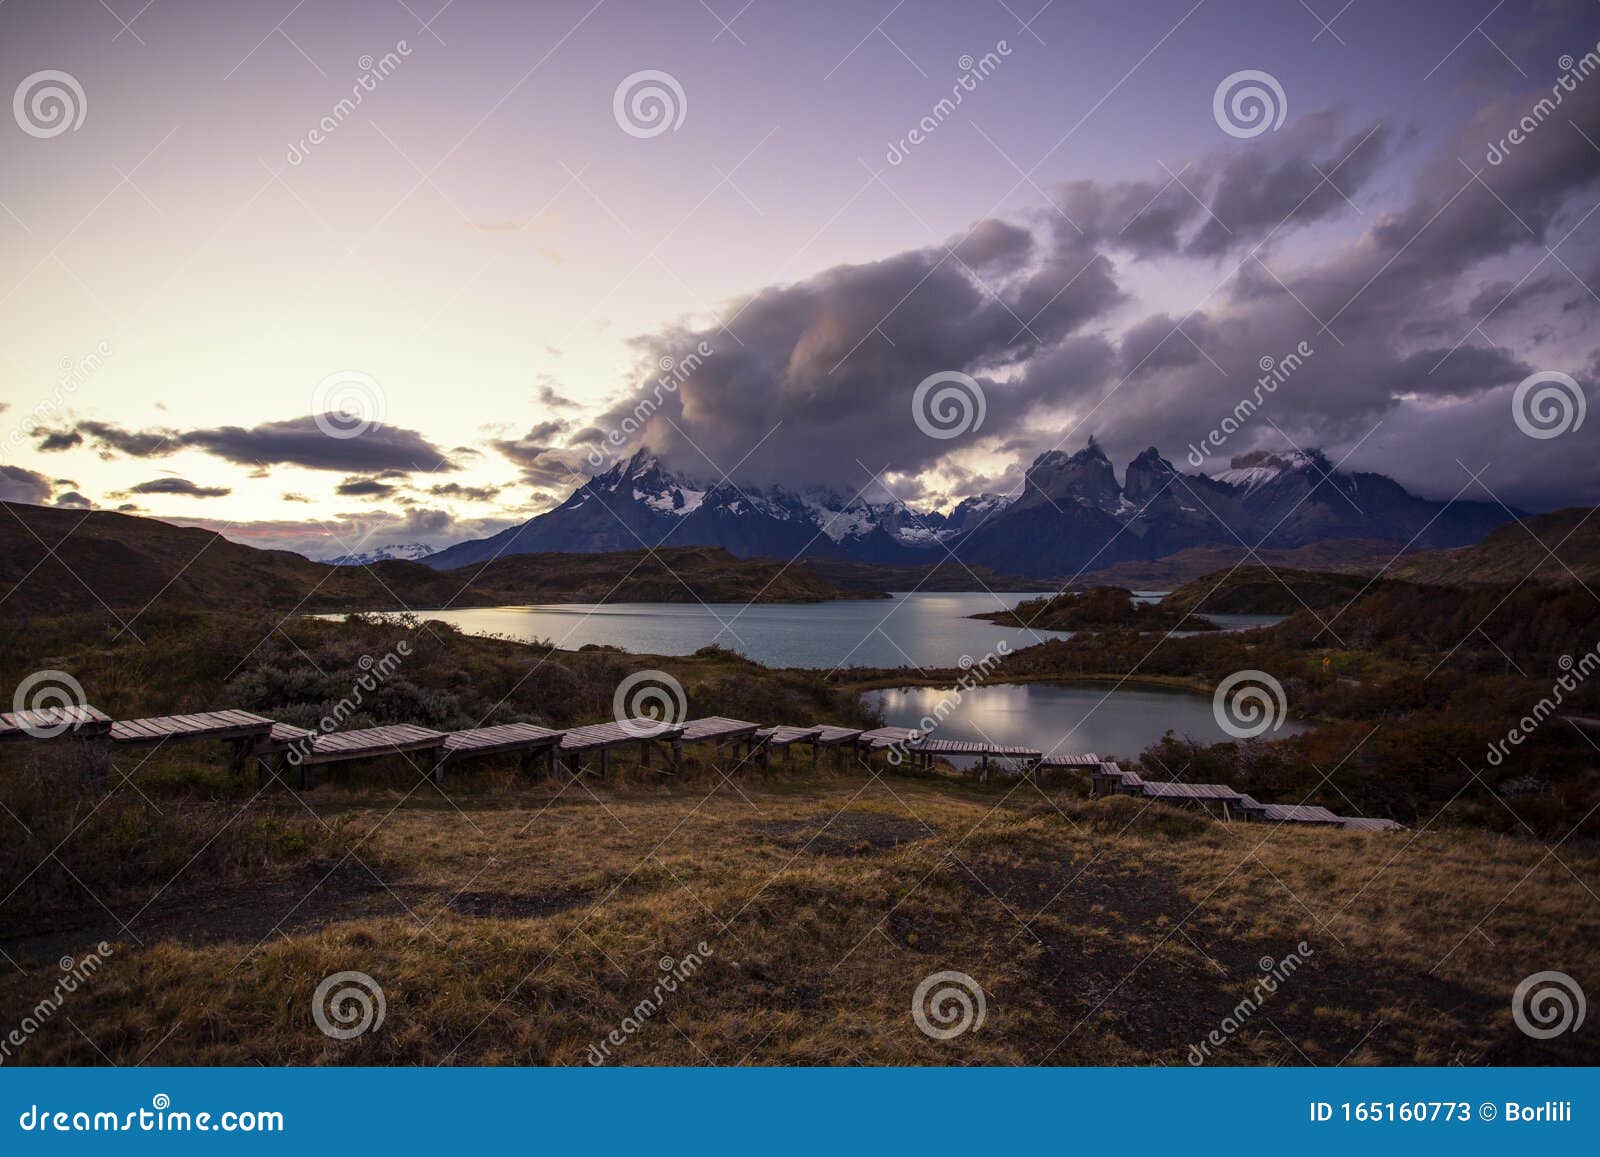 patagonia, chile - torres del paine, in the southern patagonian ice field, magellanes region of south america